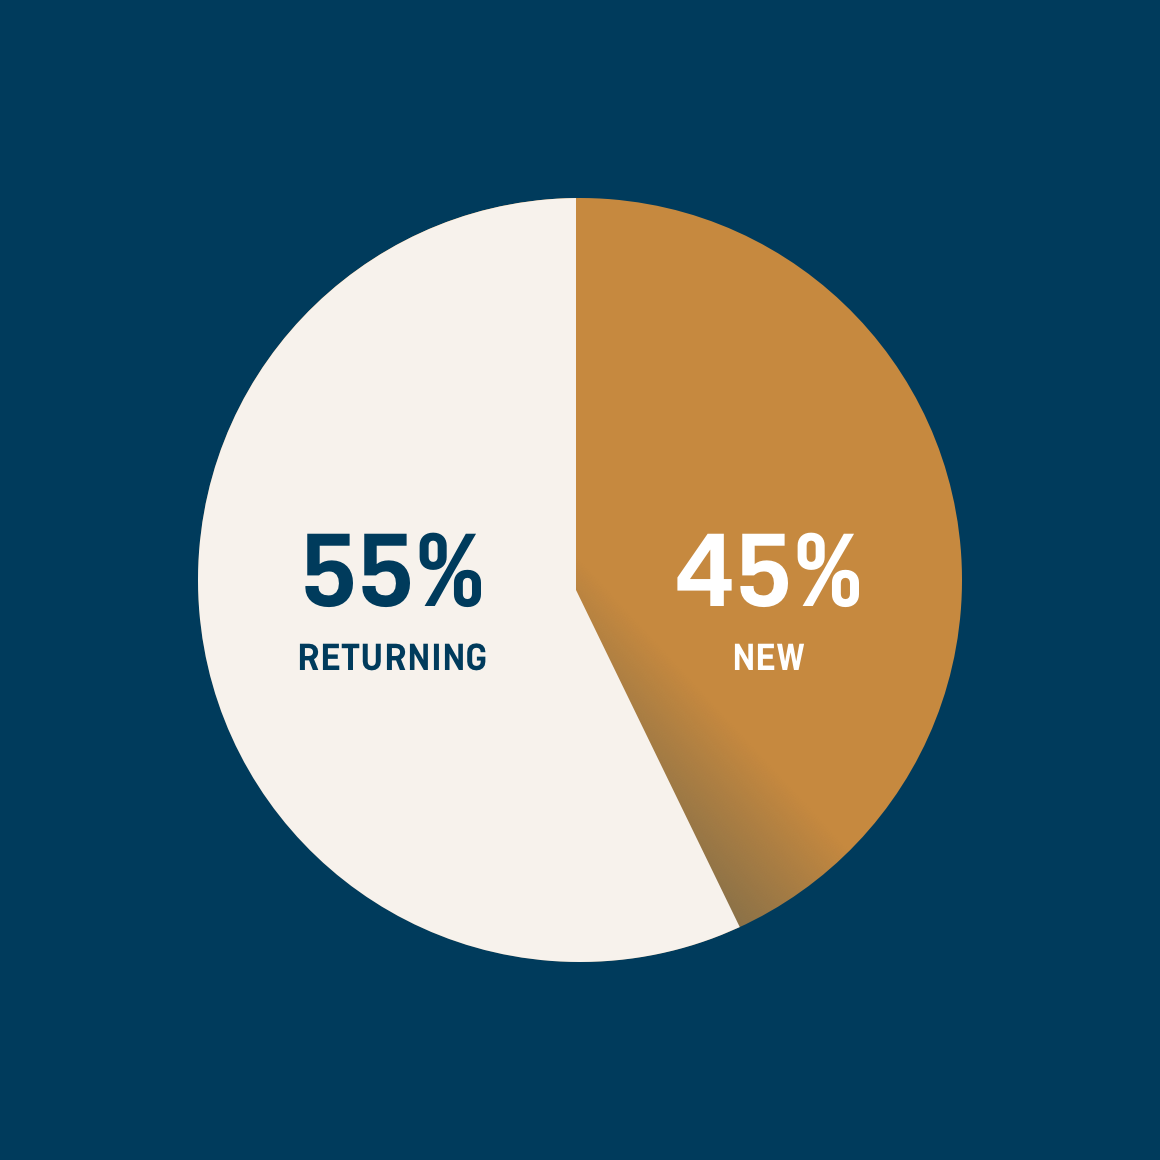 Pie chart showing user type 55% returning and 45% new